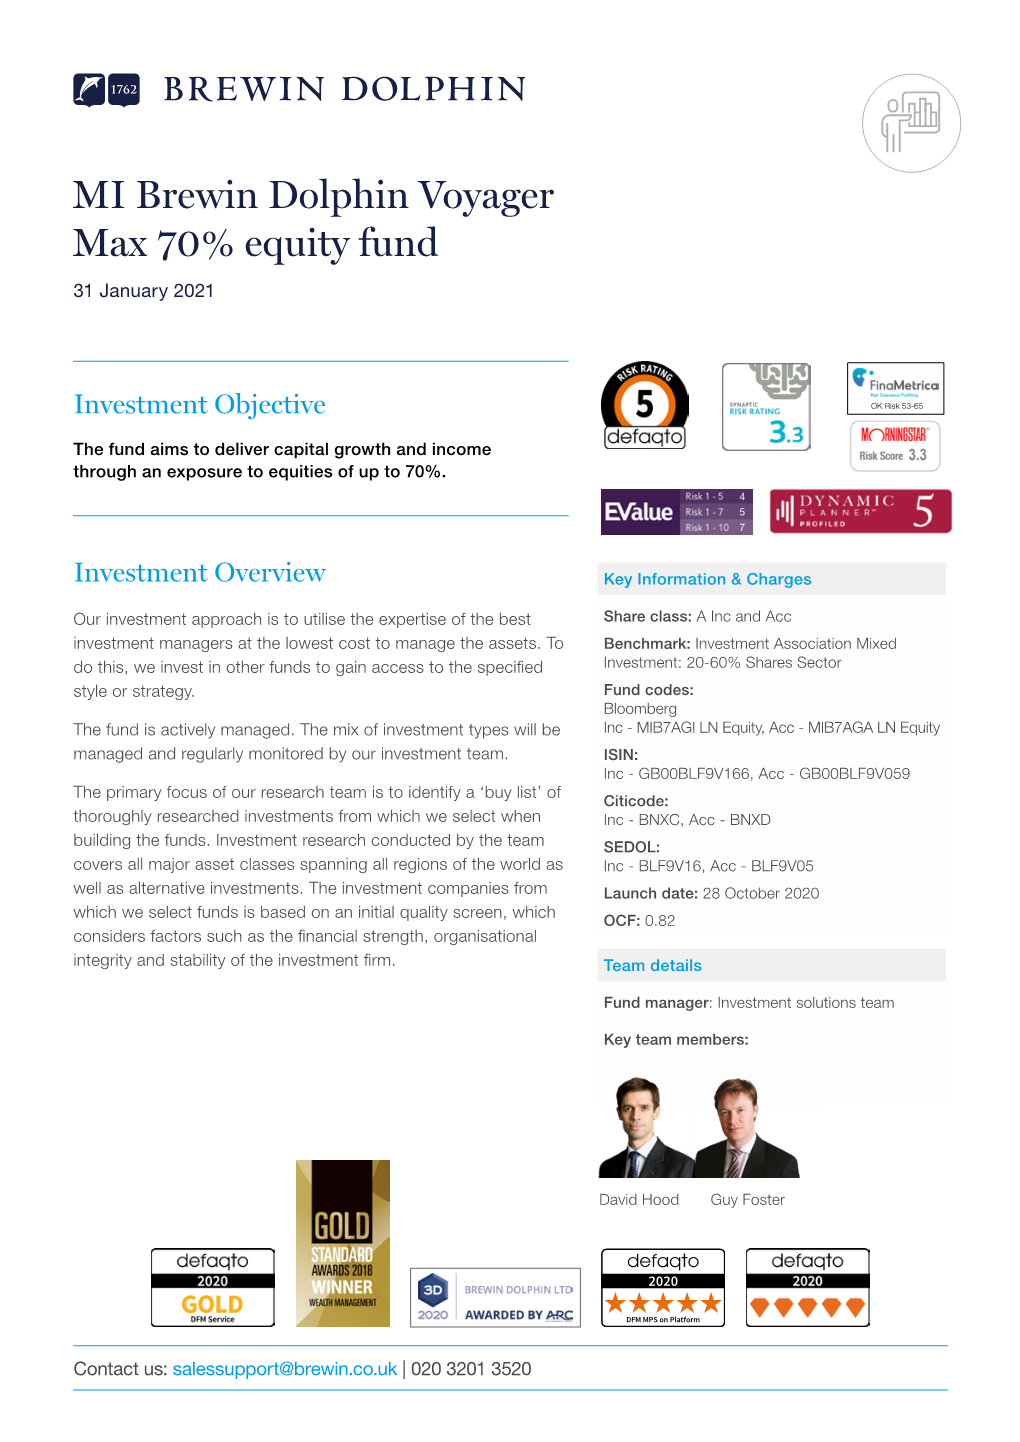 MI Brewin Dolphin Voyager Max 70% Equity Fund 31 January 2021